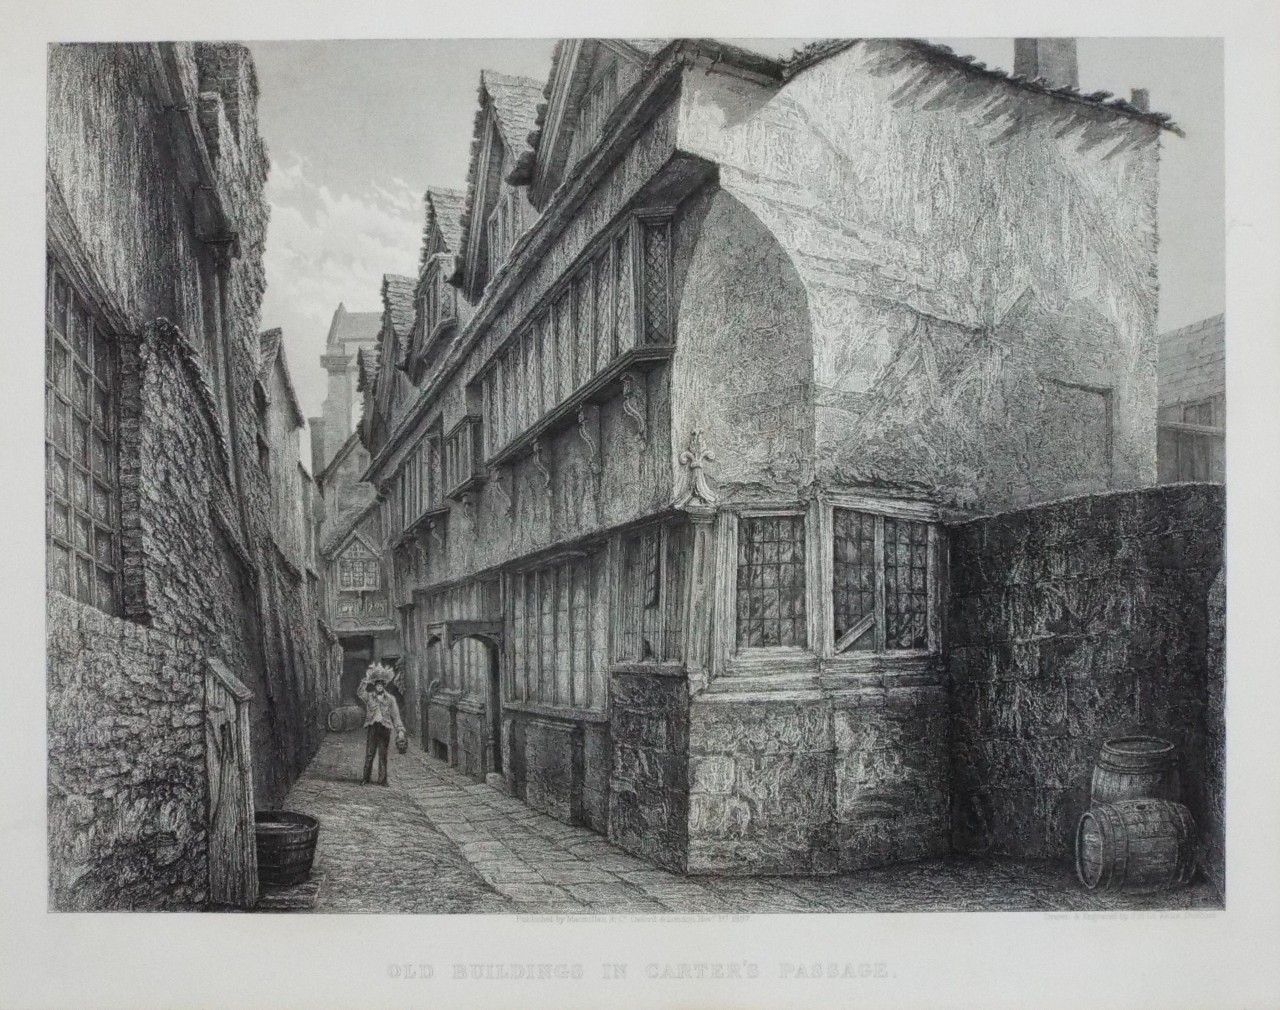 Print - Old Buildings in Carter's Passage. - Le